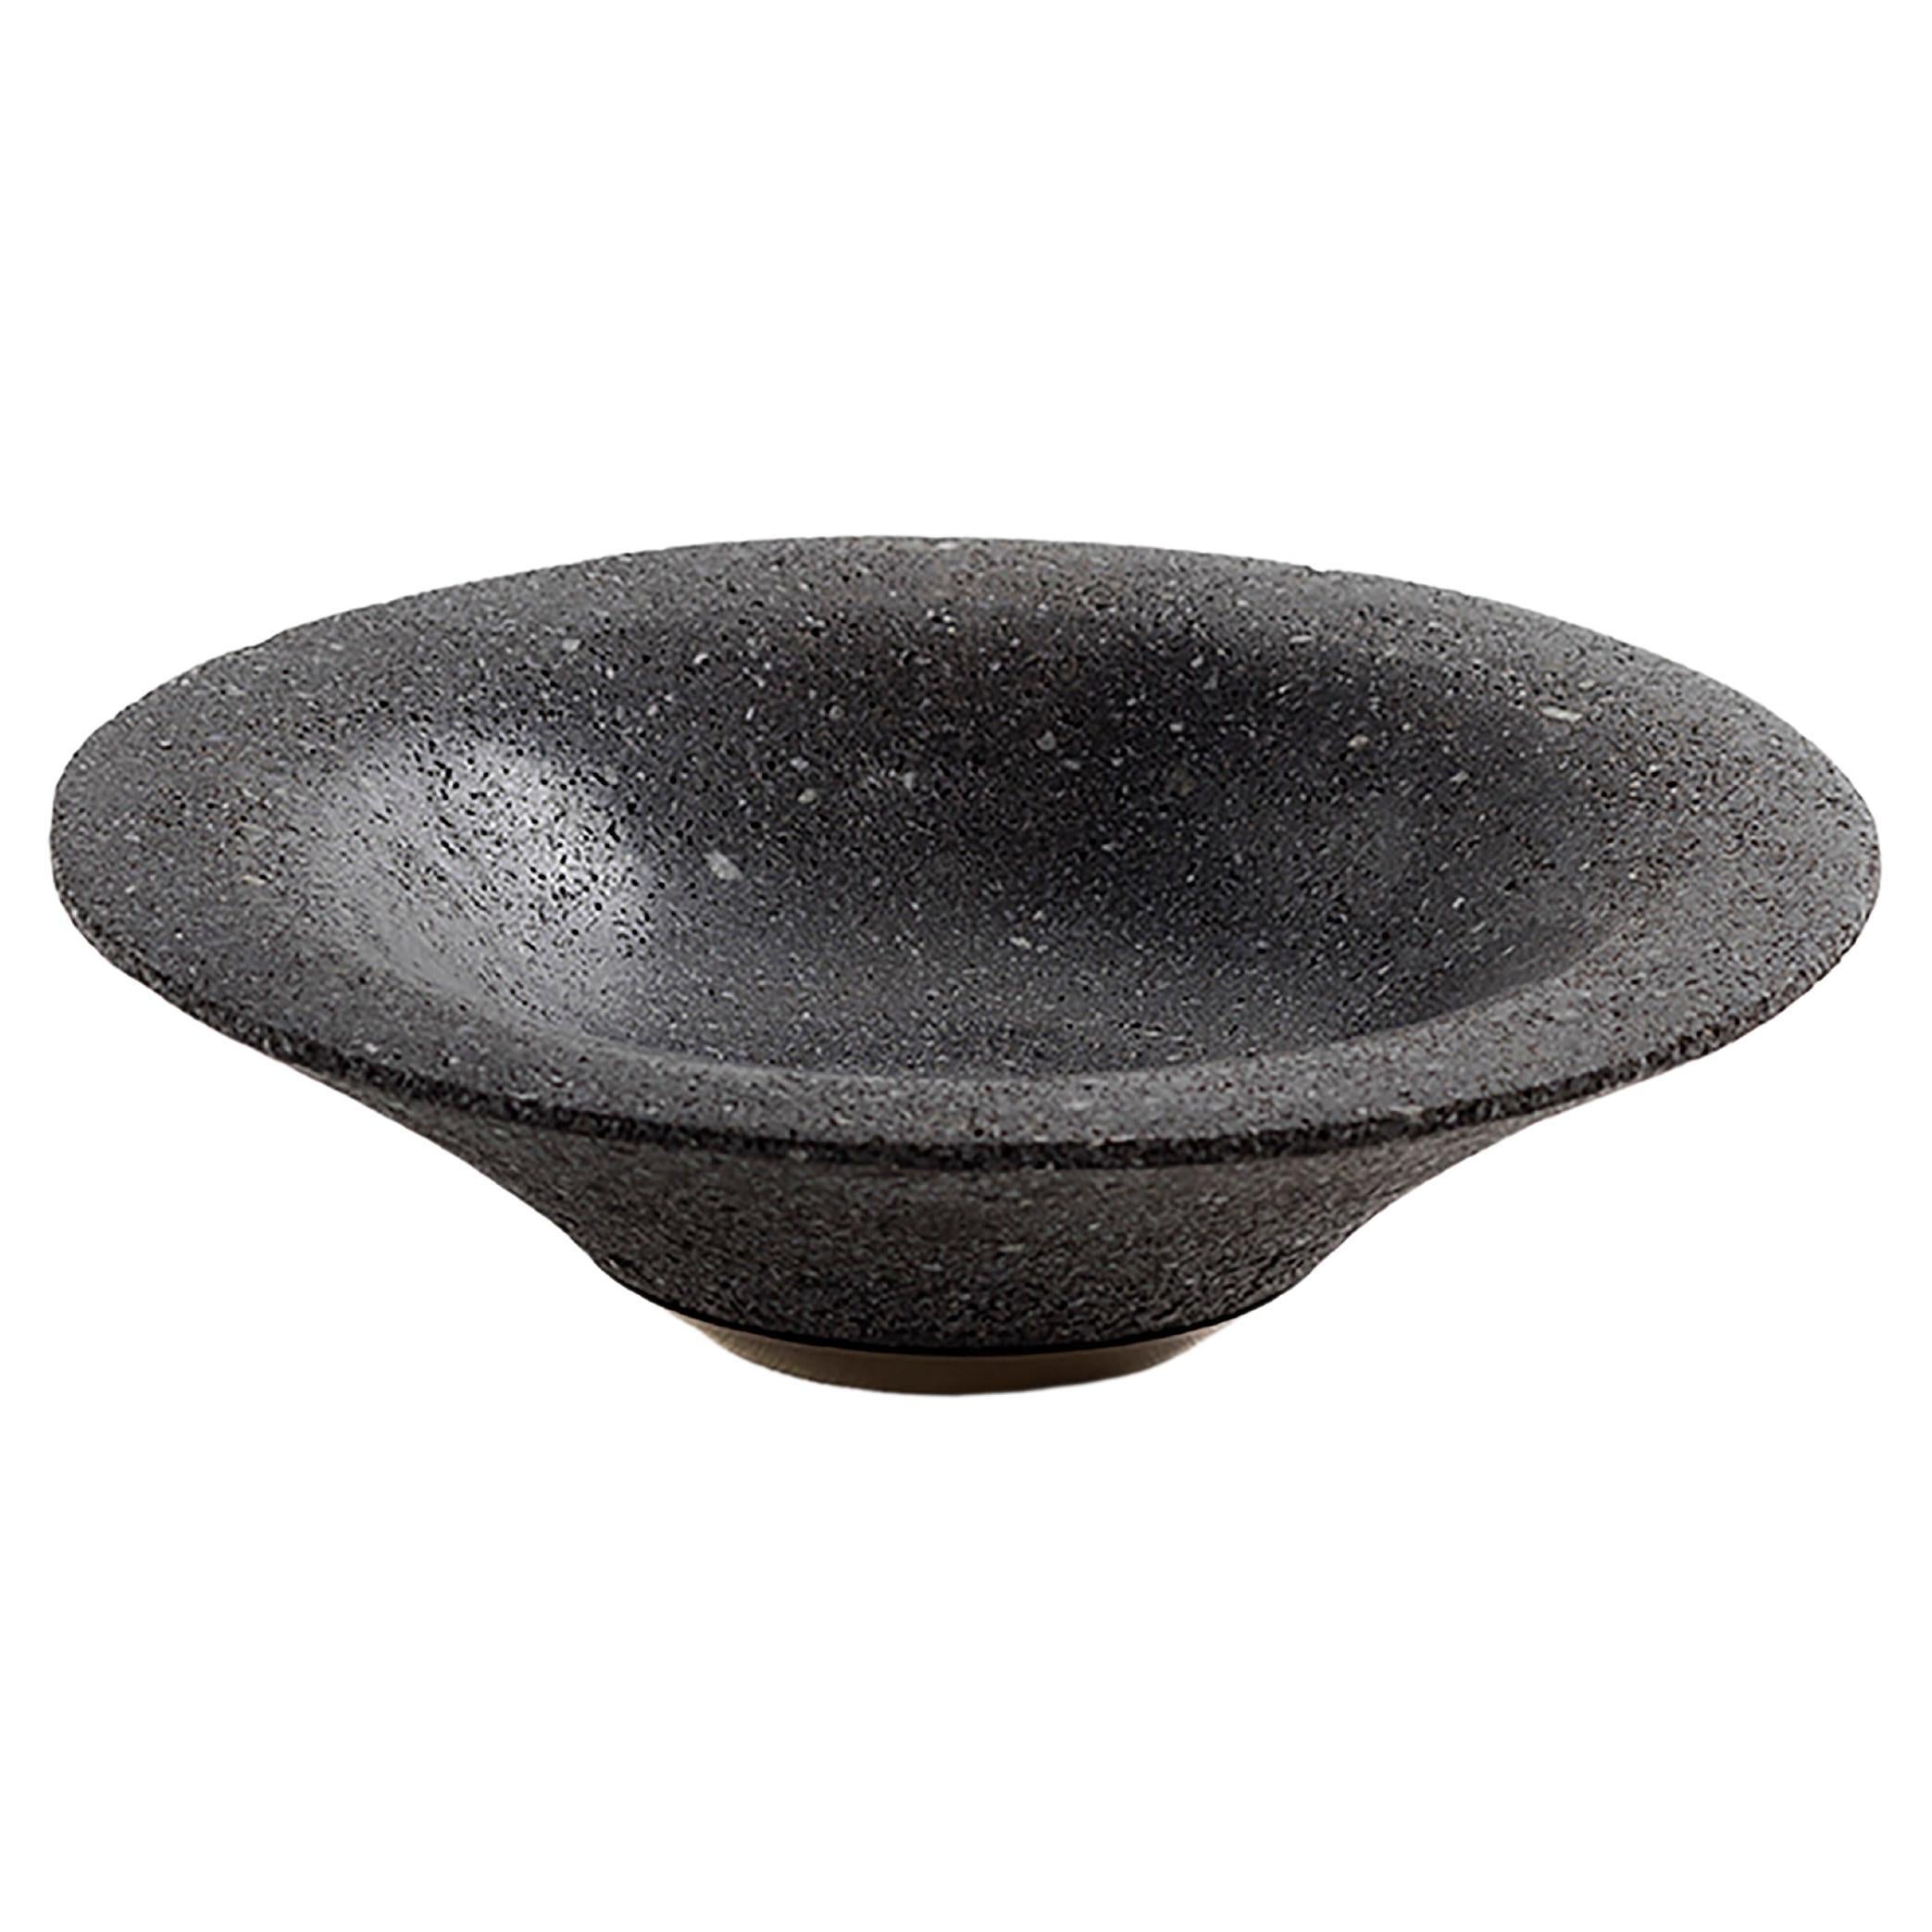 CHIMBORAZO Decorative Volcanic Stone Bowl with Bronze Detail by ANDEAN, In Stock For Sale